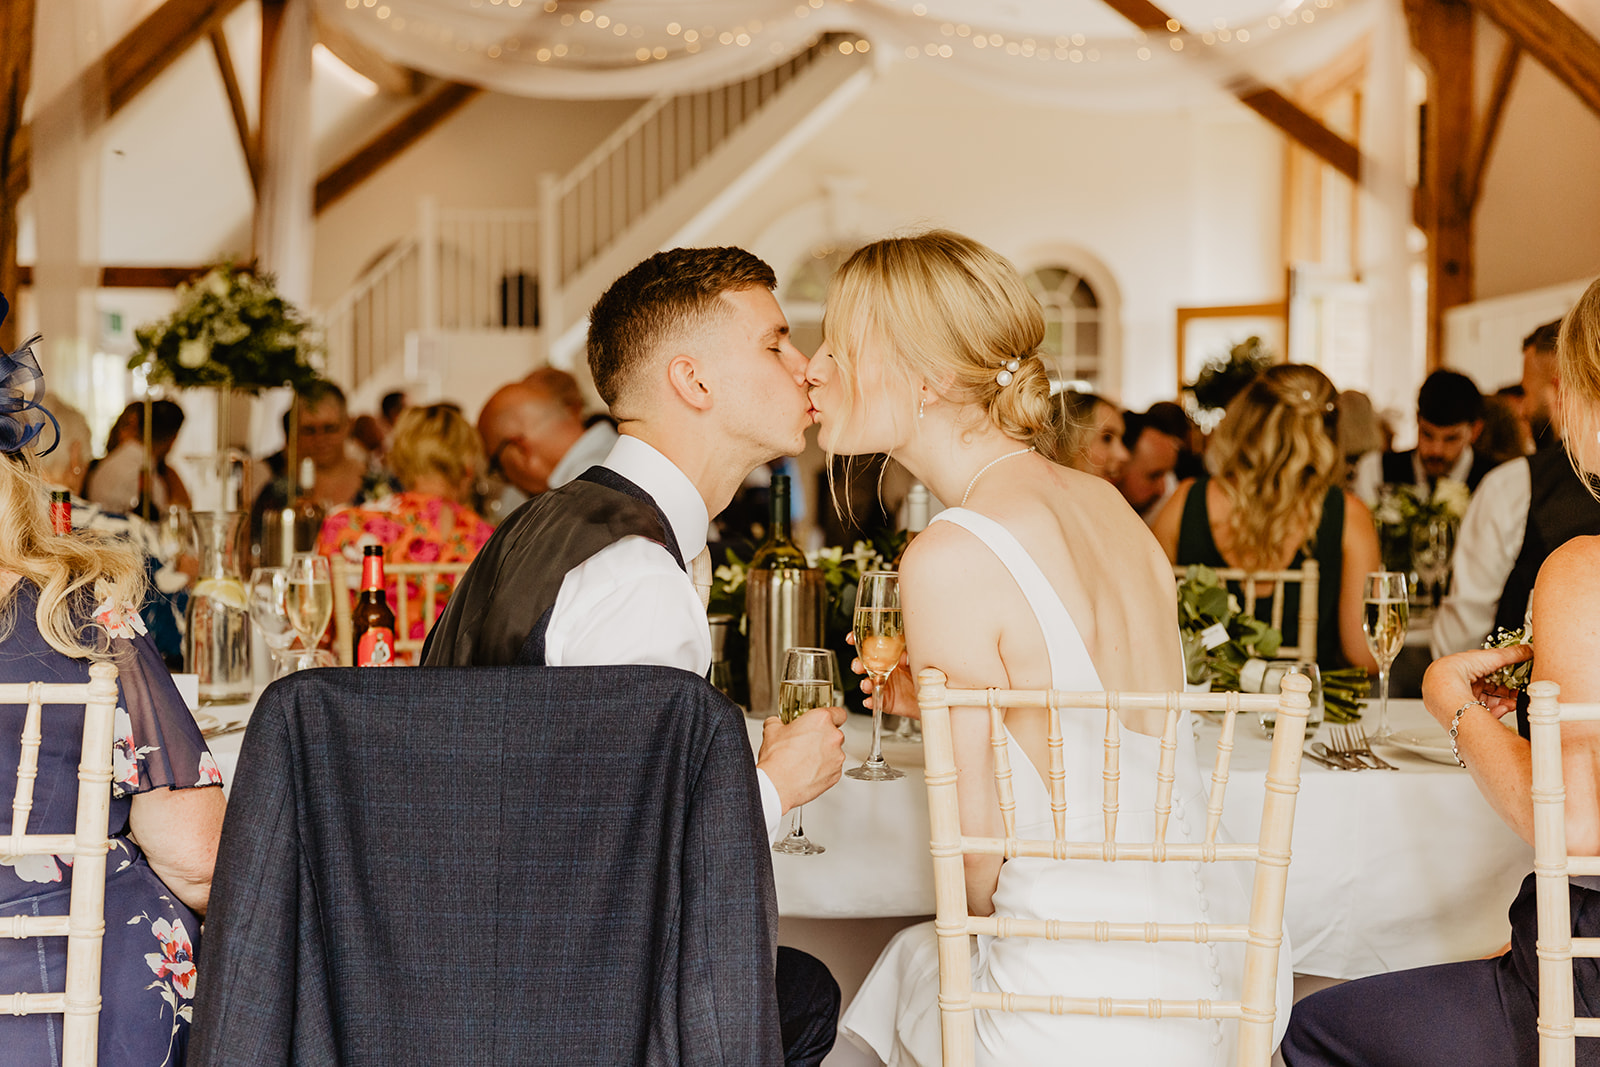 Bride and groom kissing at their table at a Bury Manor Barn Wedding in Sussex. Photographer OliveJoy Photography.